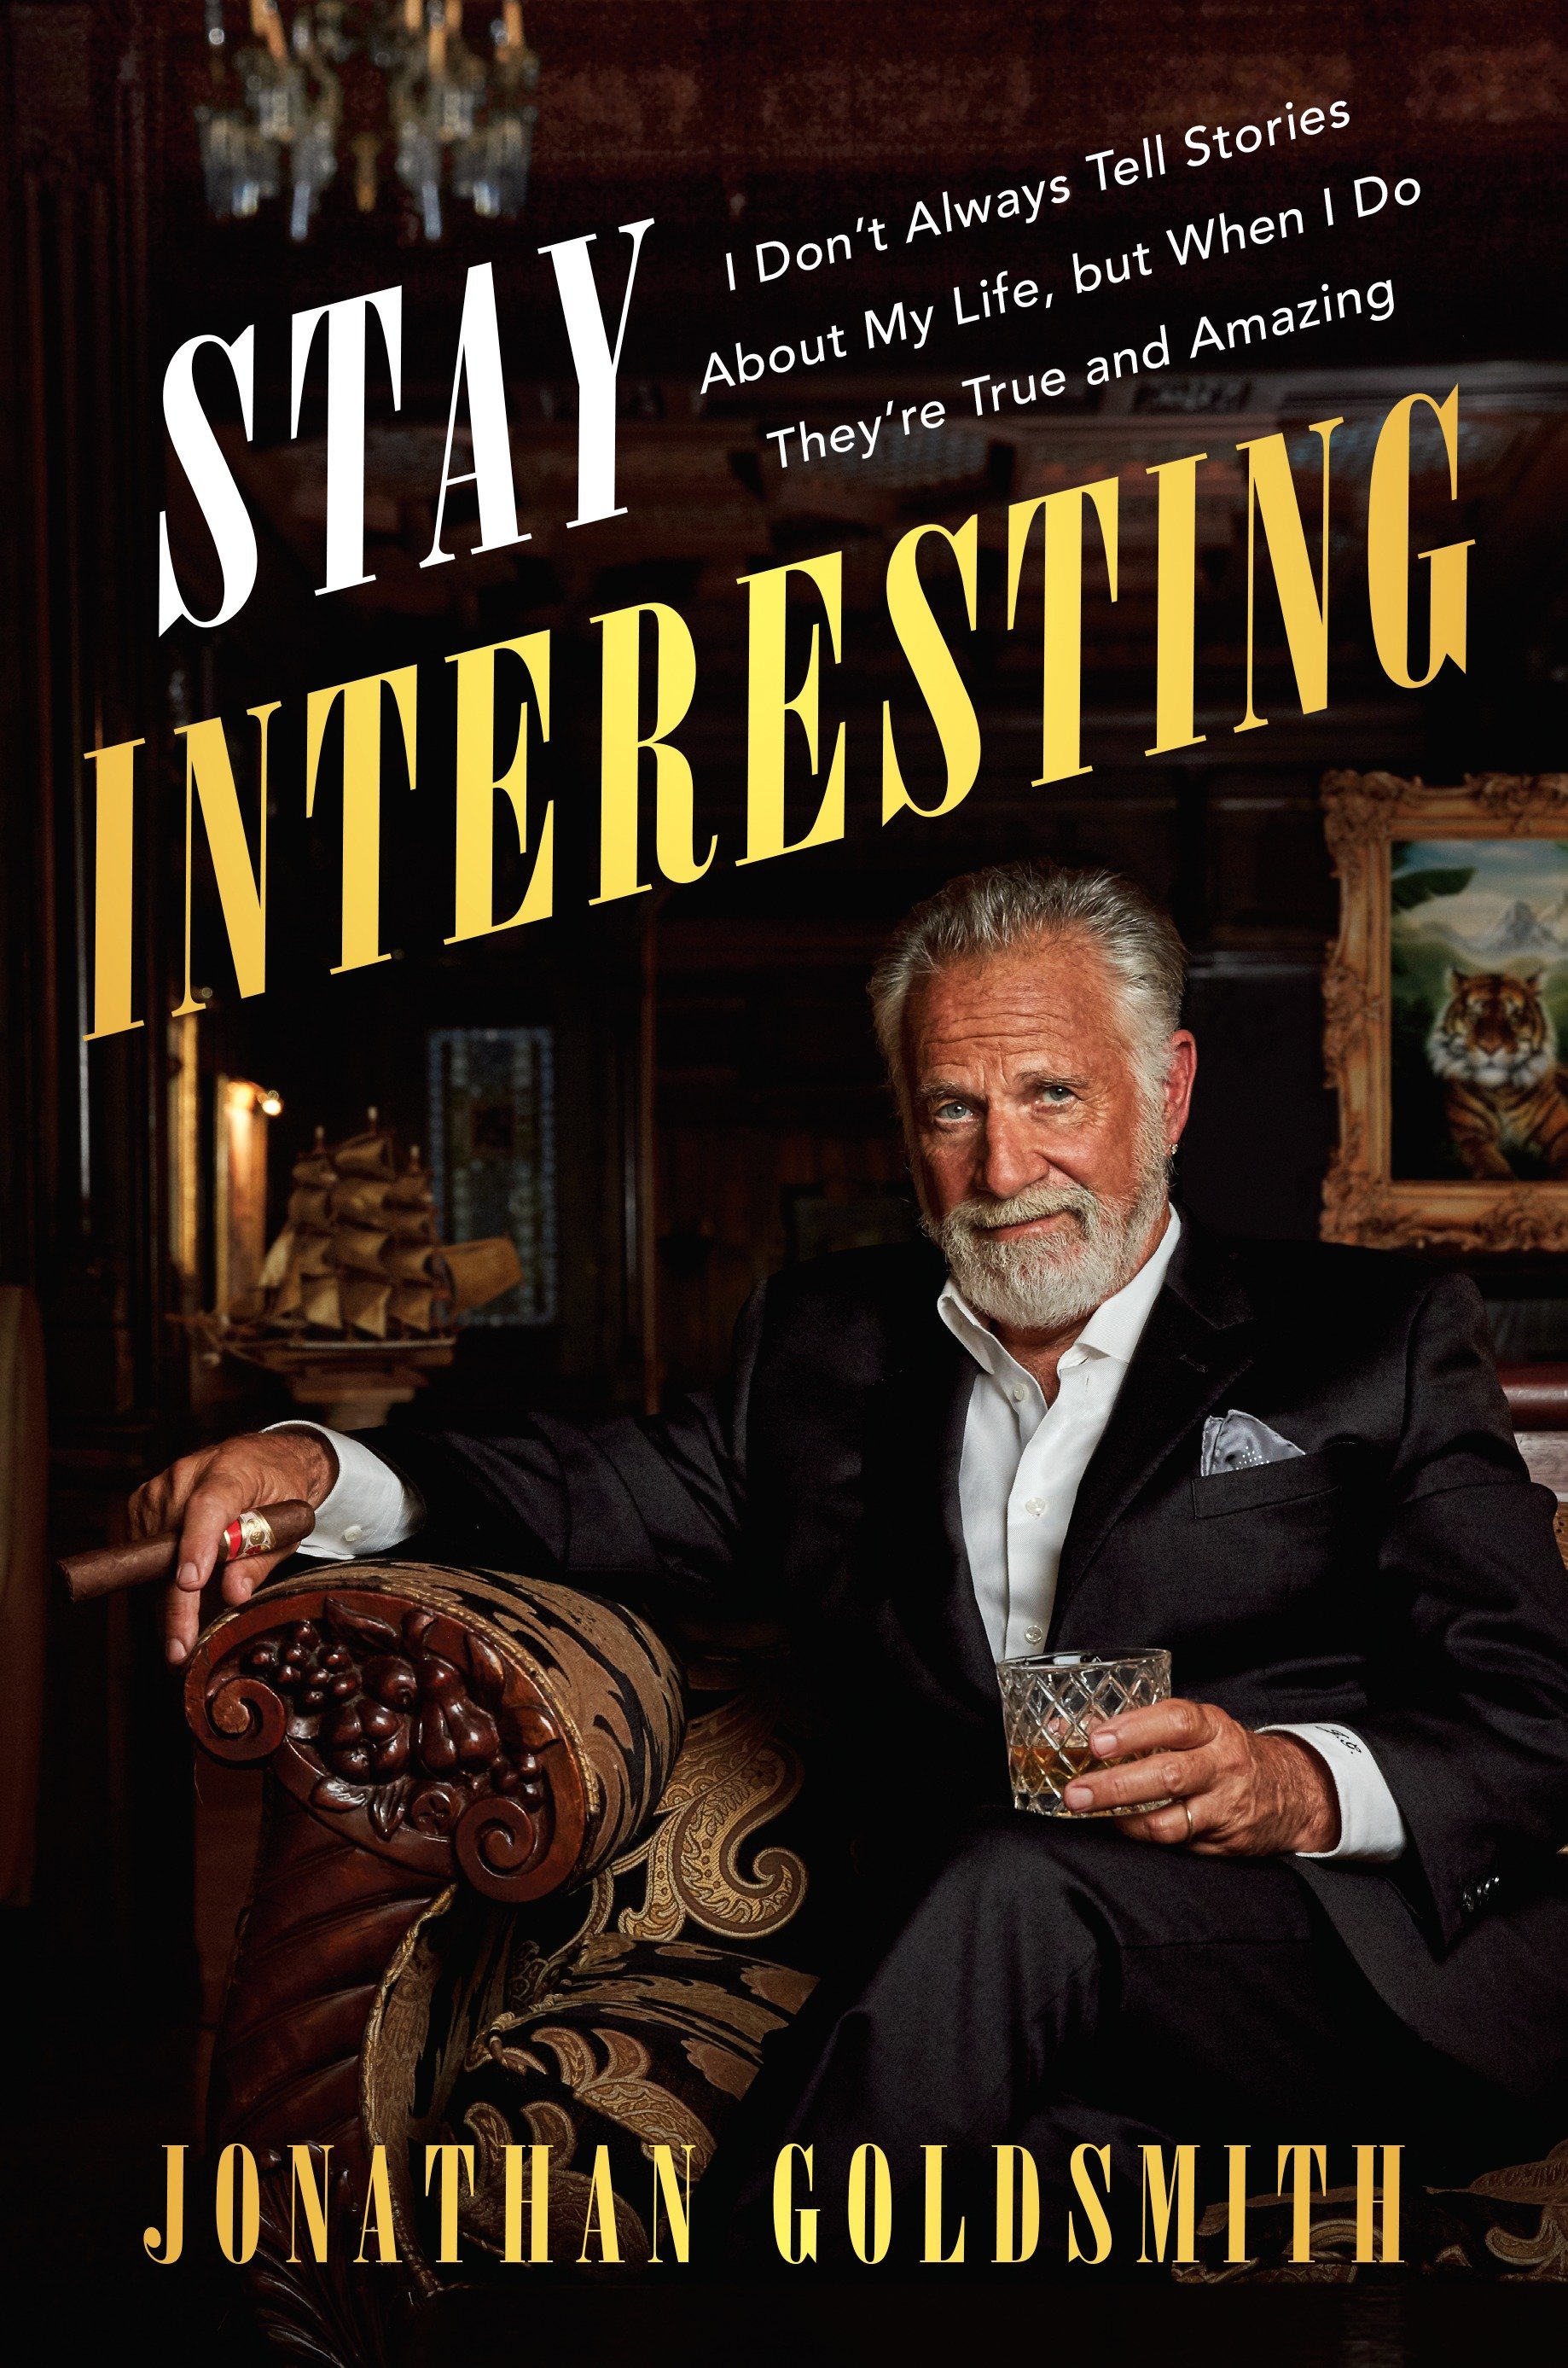 Stay interesting I don't always tell stories about my life, but when I do they're true and amazing cover image